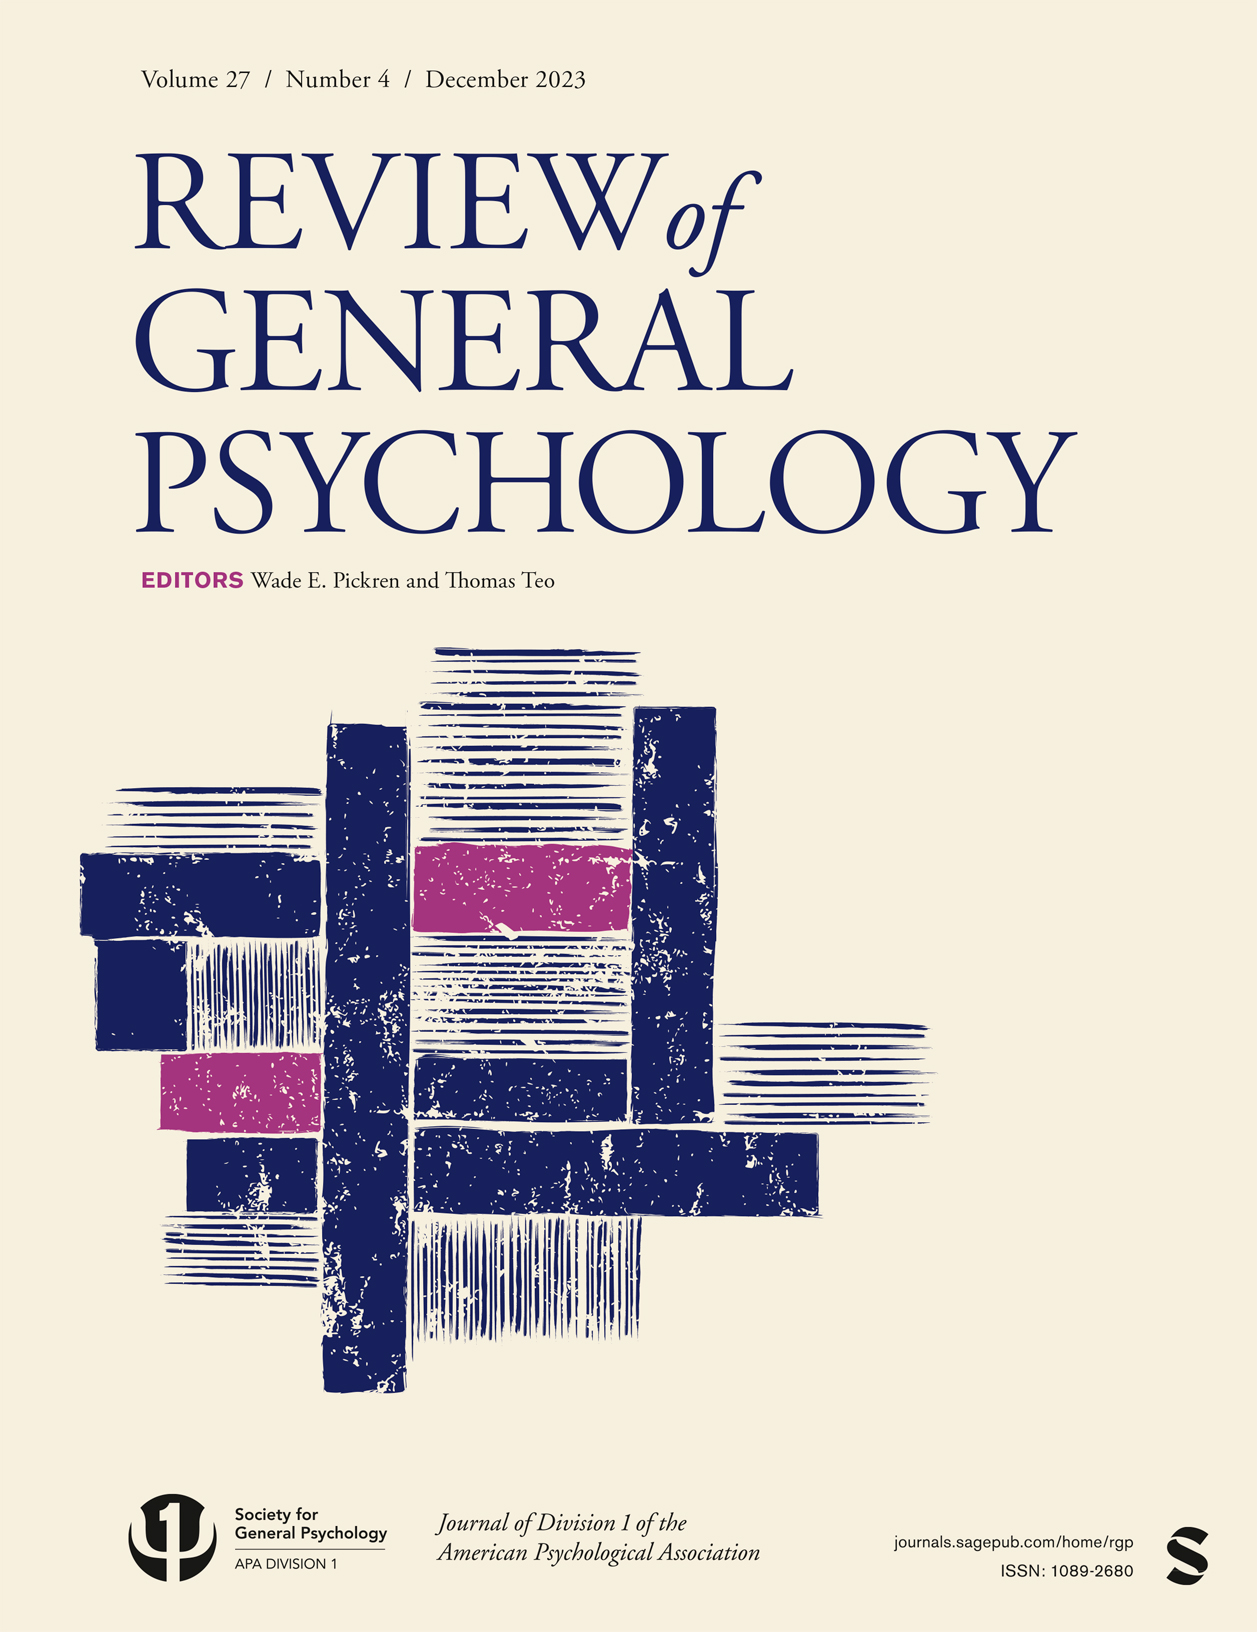 The Review of General Psychology cover